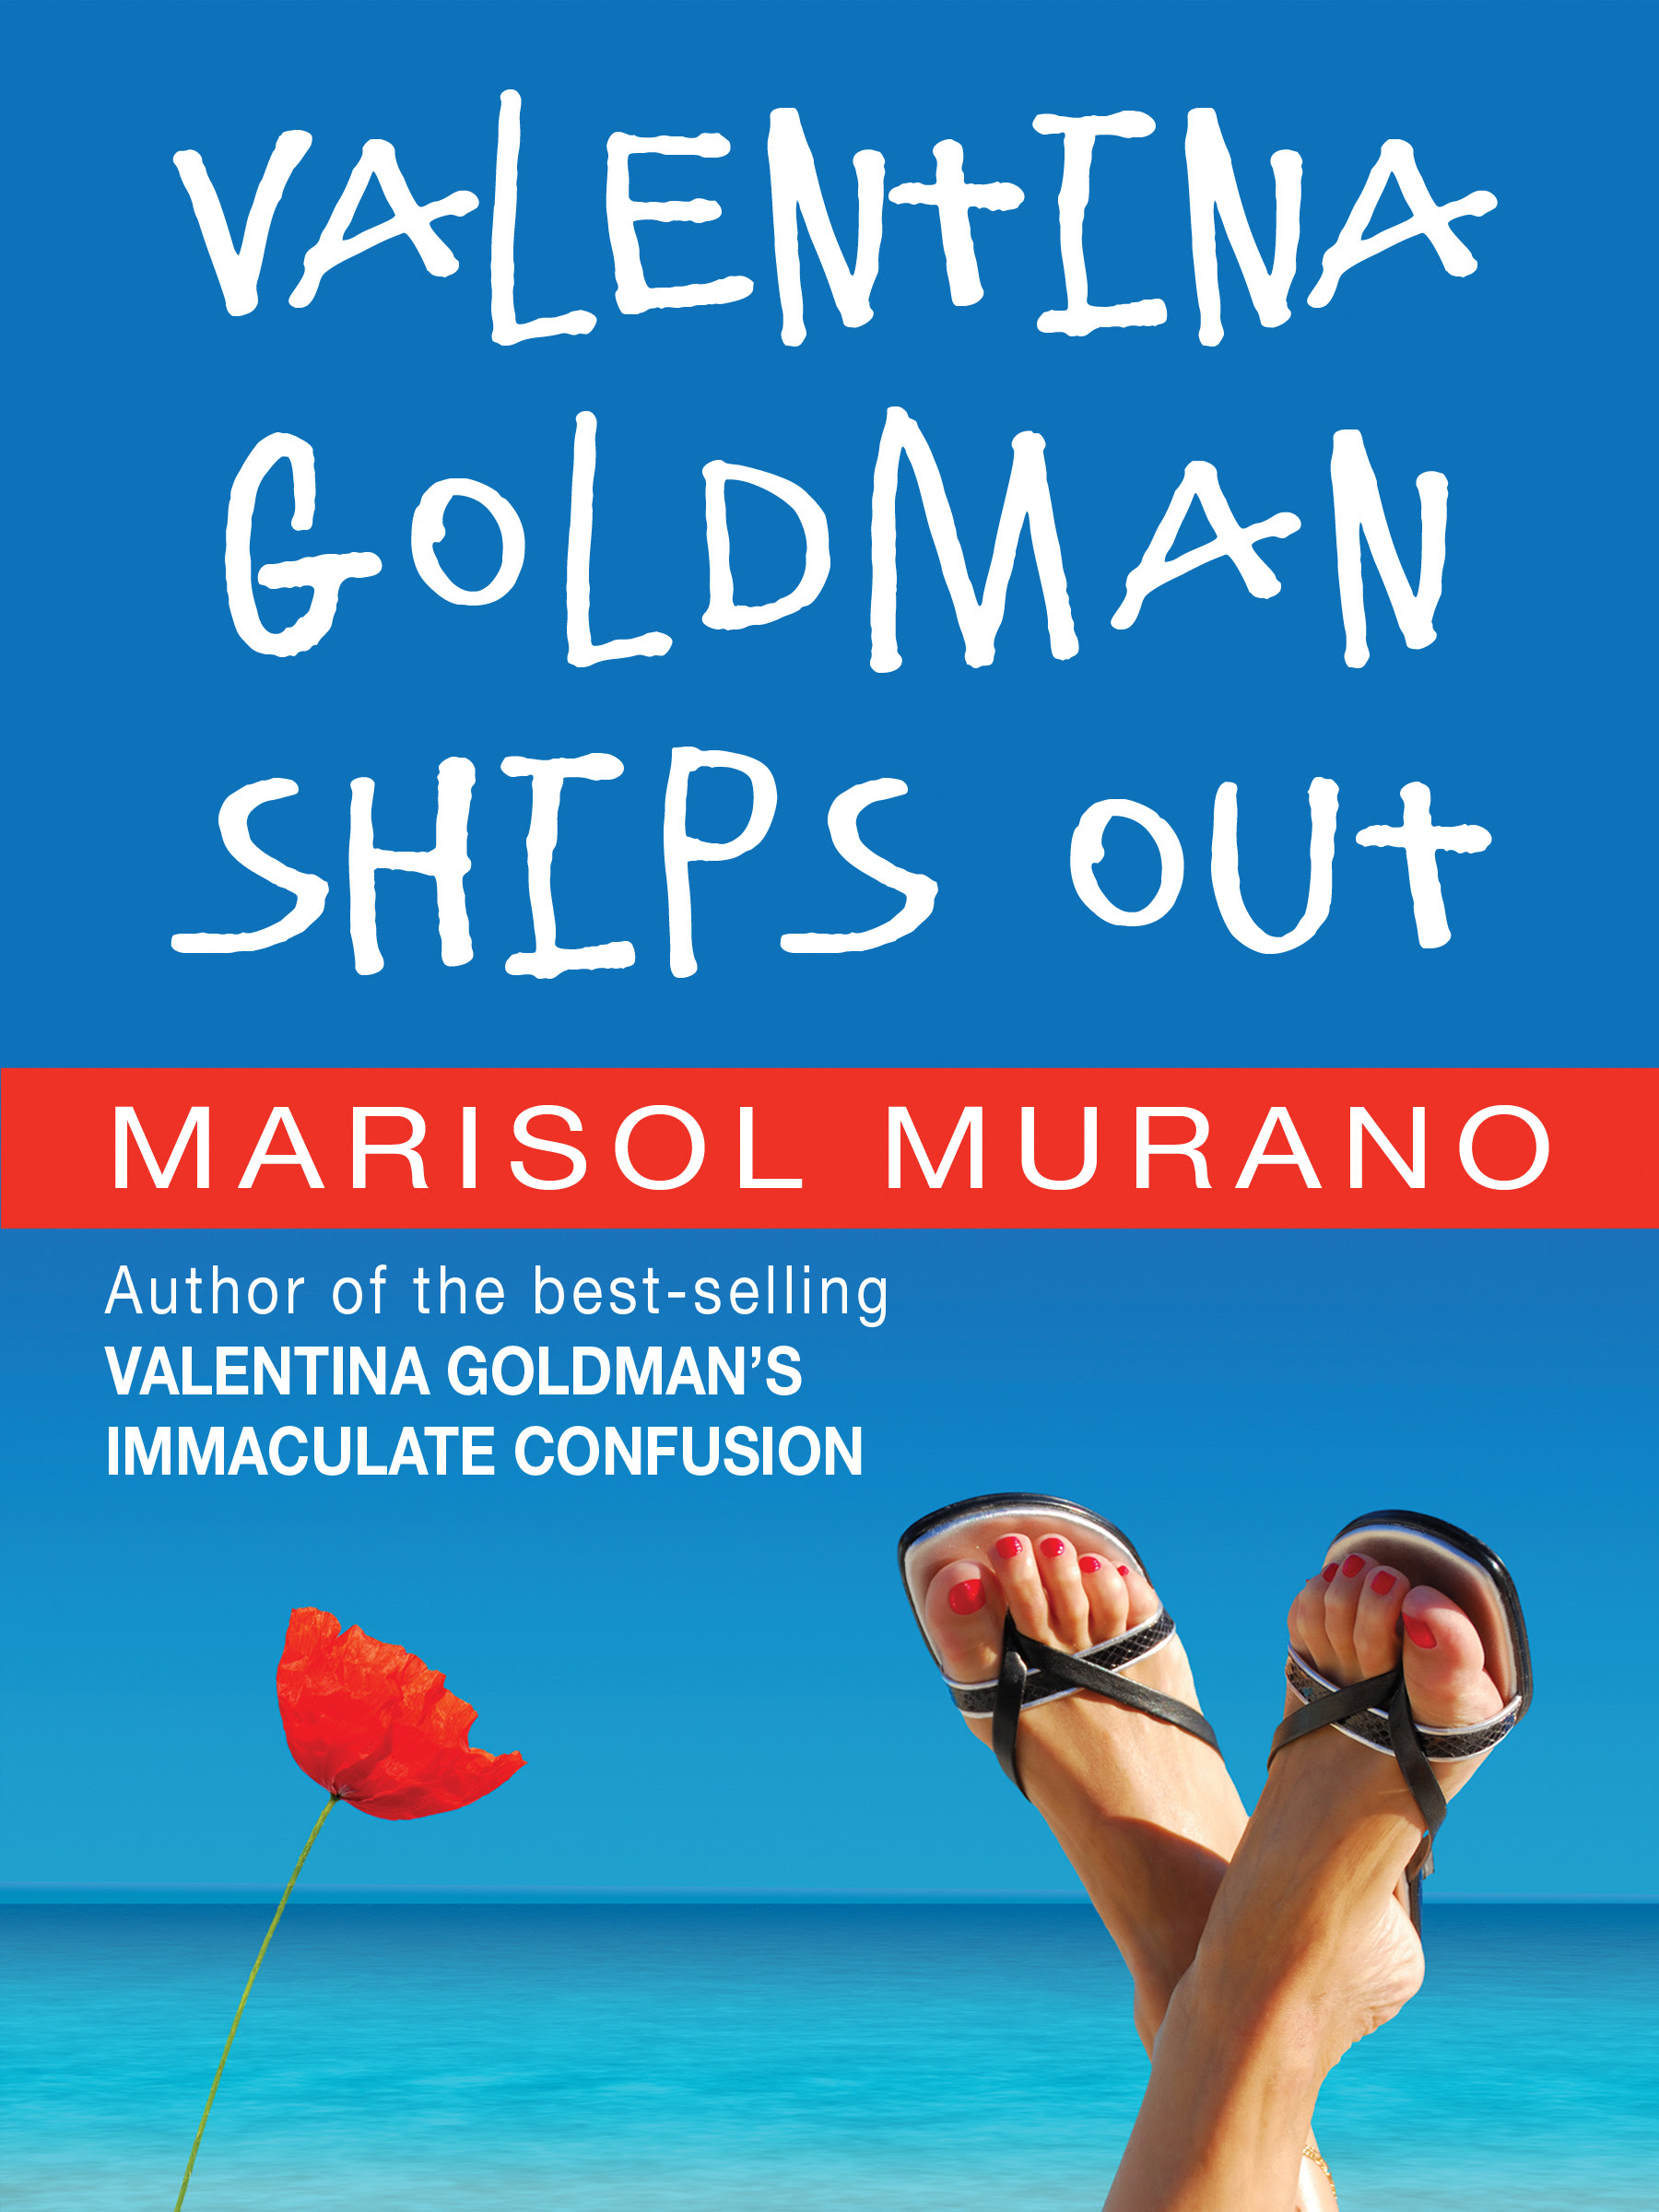 Image description: shows a woman's sandaled feet crossed in front of an expanse of bright blue sky and ocean. A red flower is in the bottom left corner. Text: Valentina Goldman Ships Out. Marisol Murano, author of the best-selling Valentina Goldman's Immaculate Confusion.